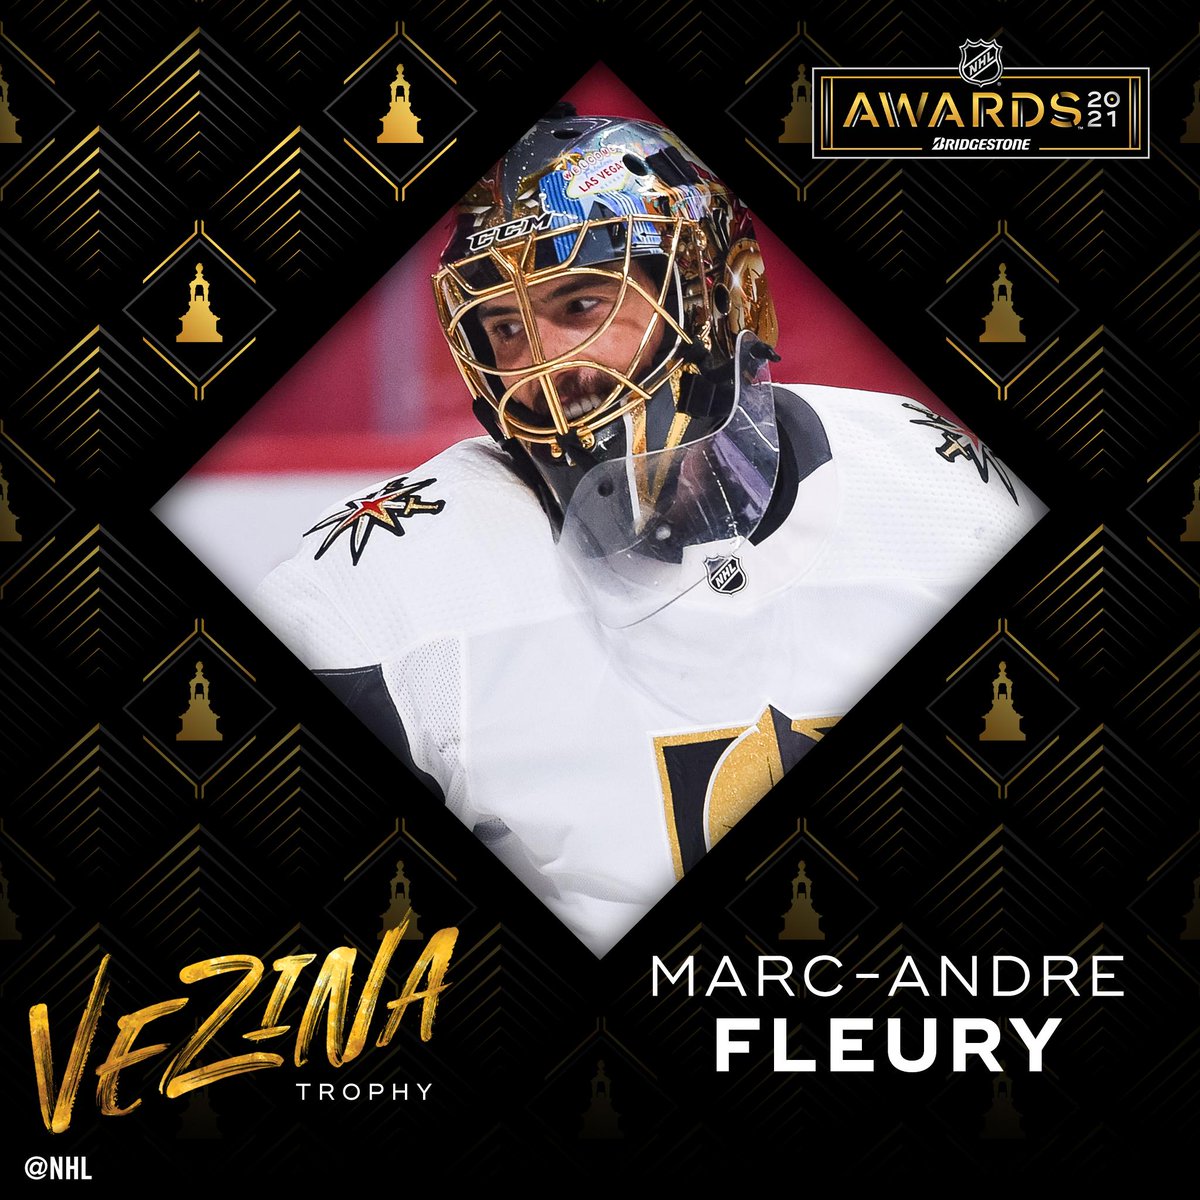 Congratulations to first-time winner of the prestigious Vezina Trophy, Marc-Andre Fleury! #NHLAwards